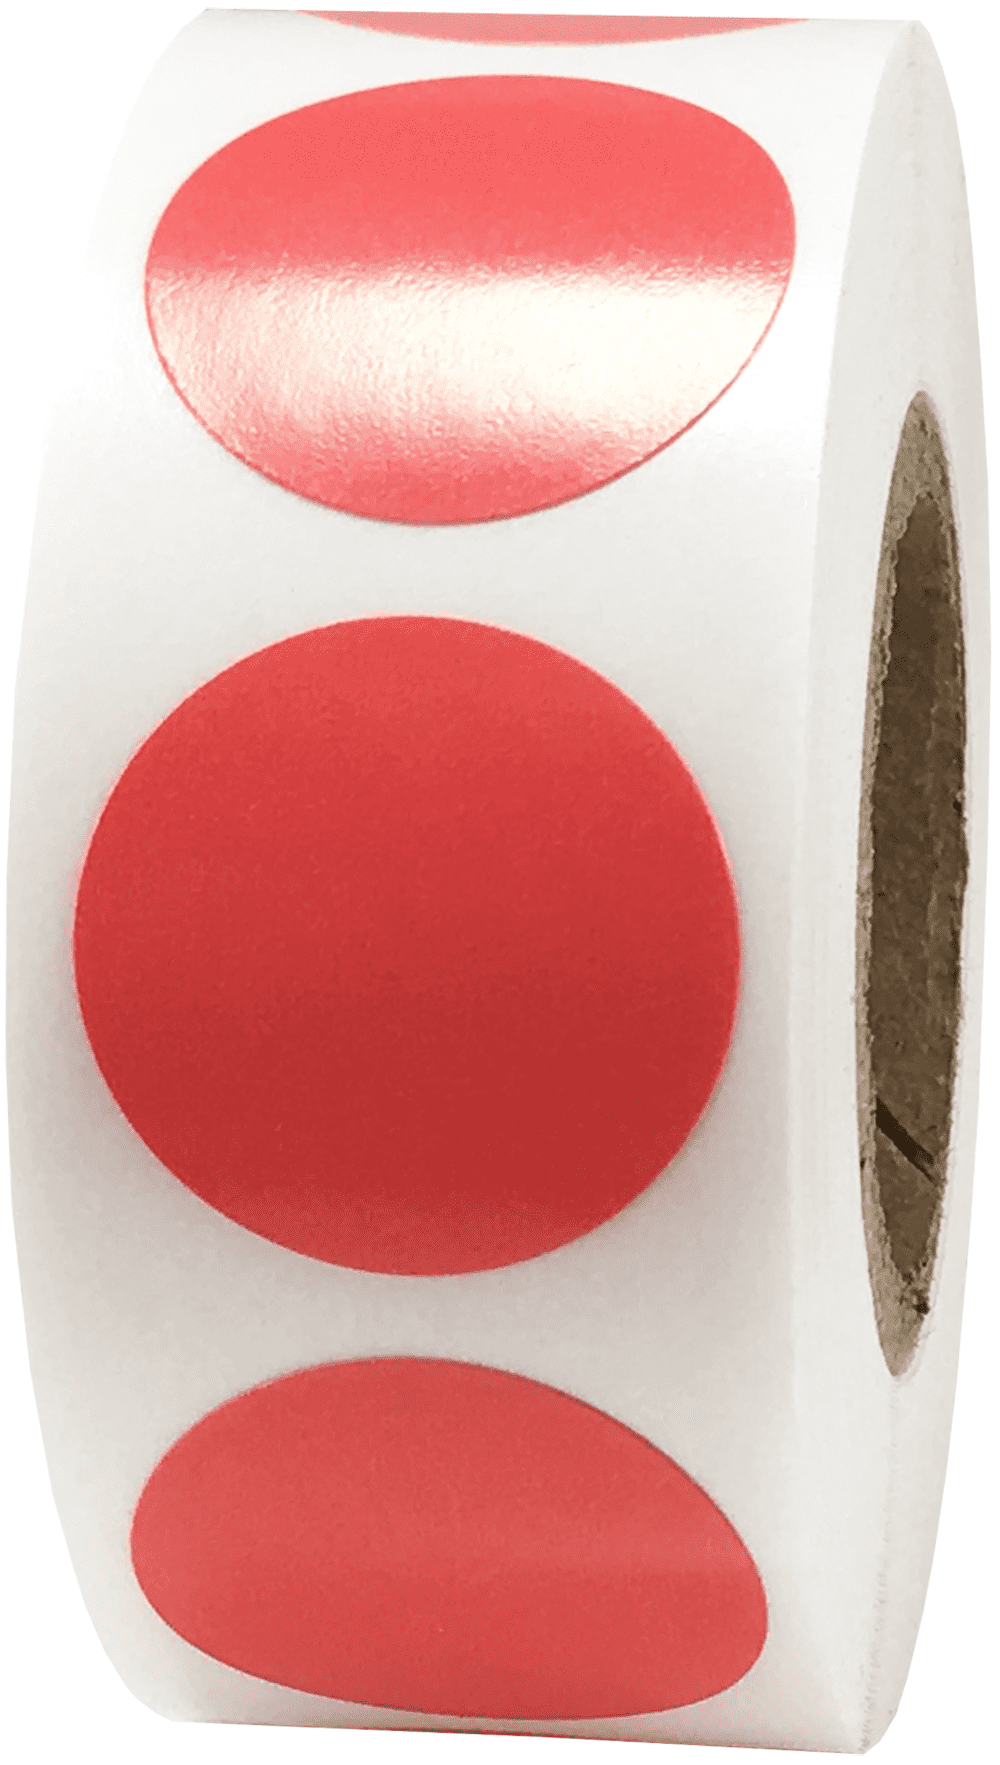 Inventory Labeling 500 Pieces/ Roll 2000 Pieces Dot Stickers Colored Circle Round Removable Color-Code Dots Stickers Label Rolls Label Sticker for Office Red, Pink, Yellow, Green 